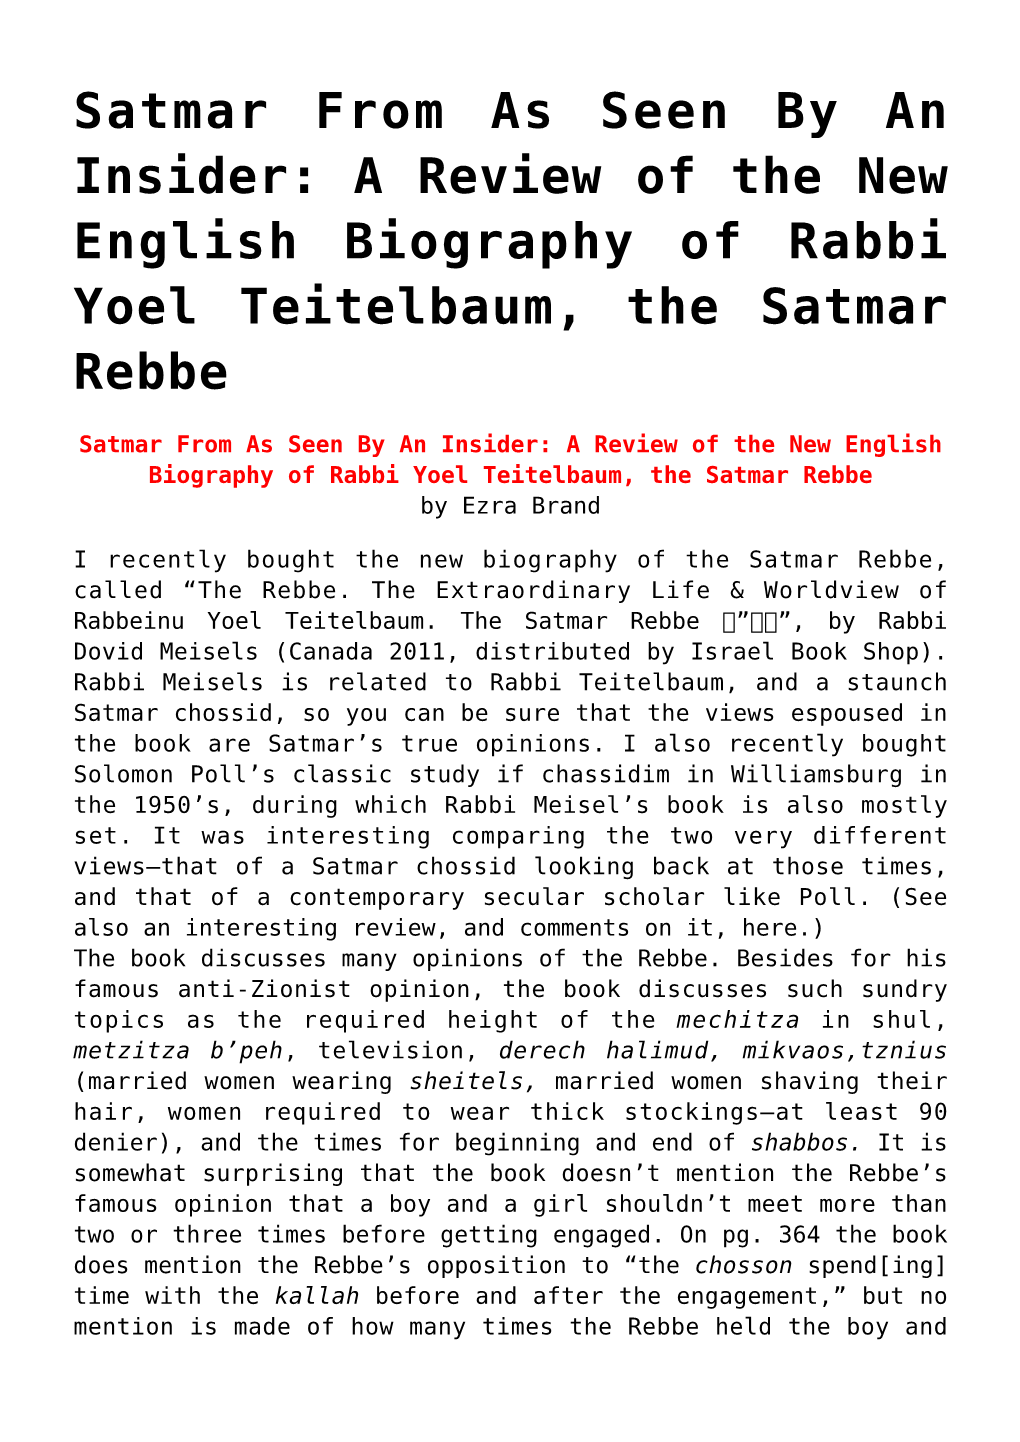 Satmar from As Seen by an Insider: a Review of the New English Biography of Rabbi Yoel Teitelbaum, the Satmar Rebbe